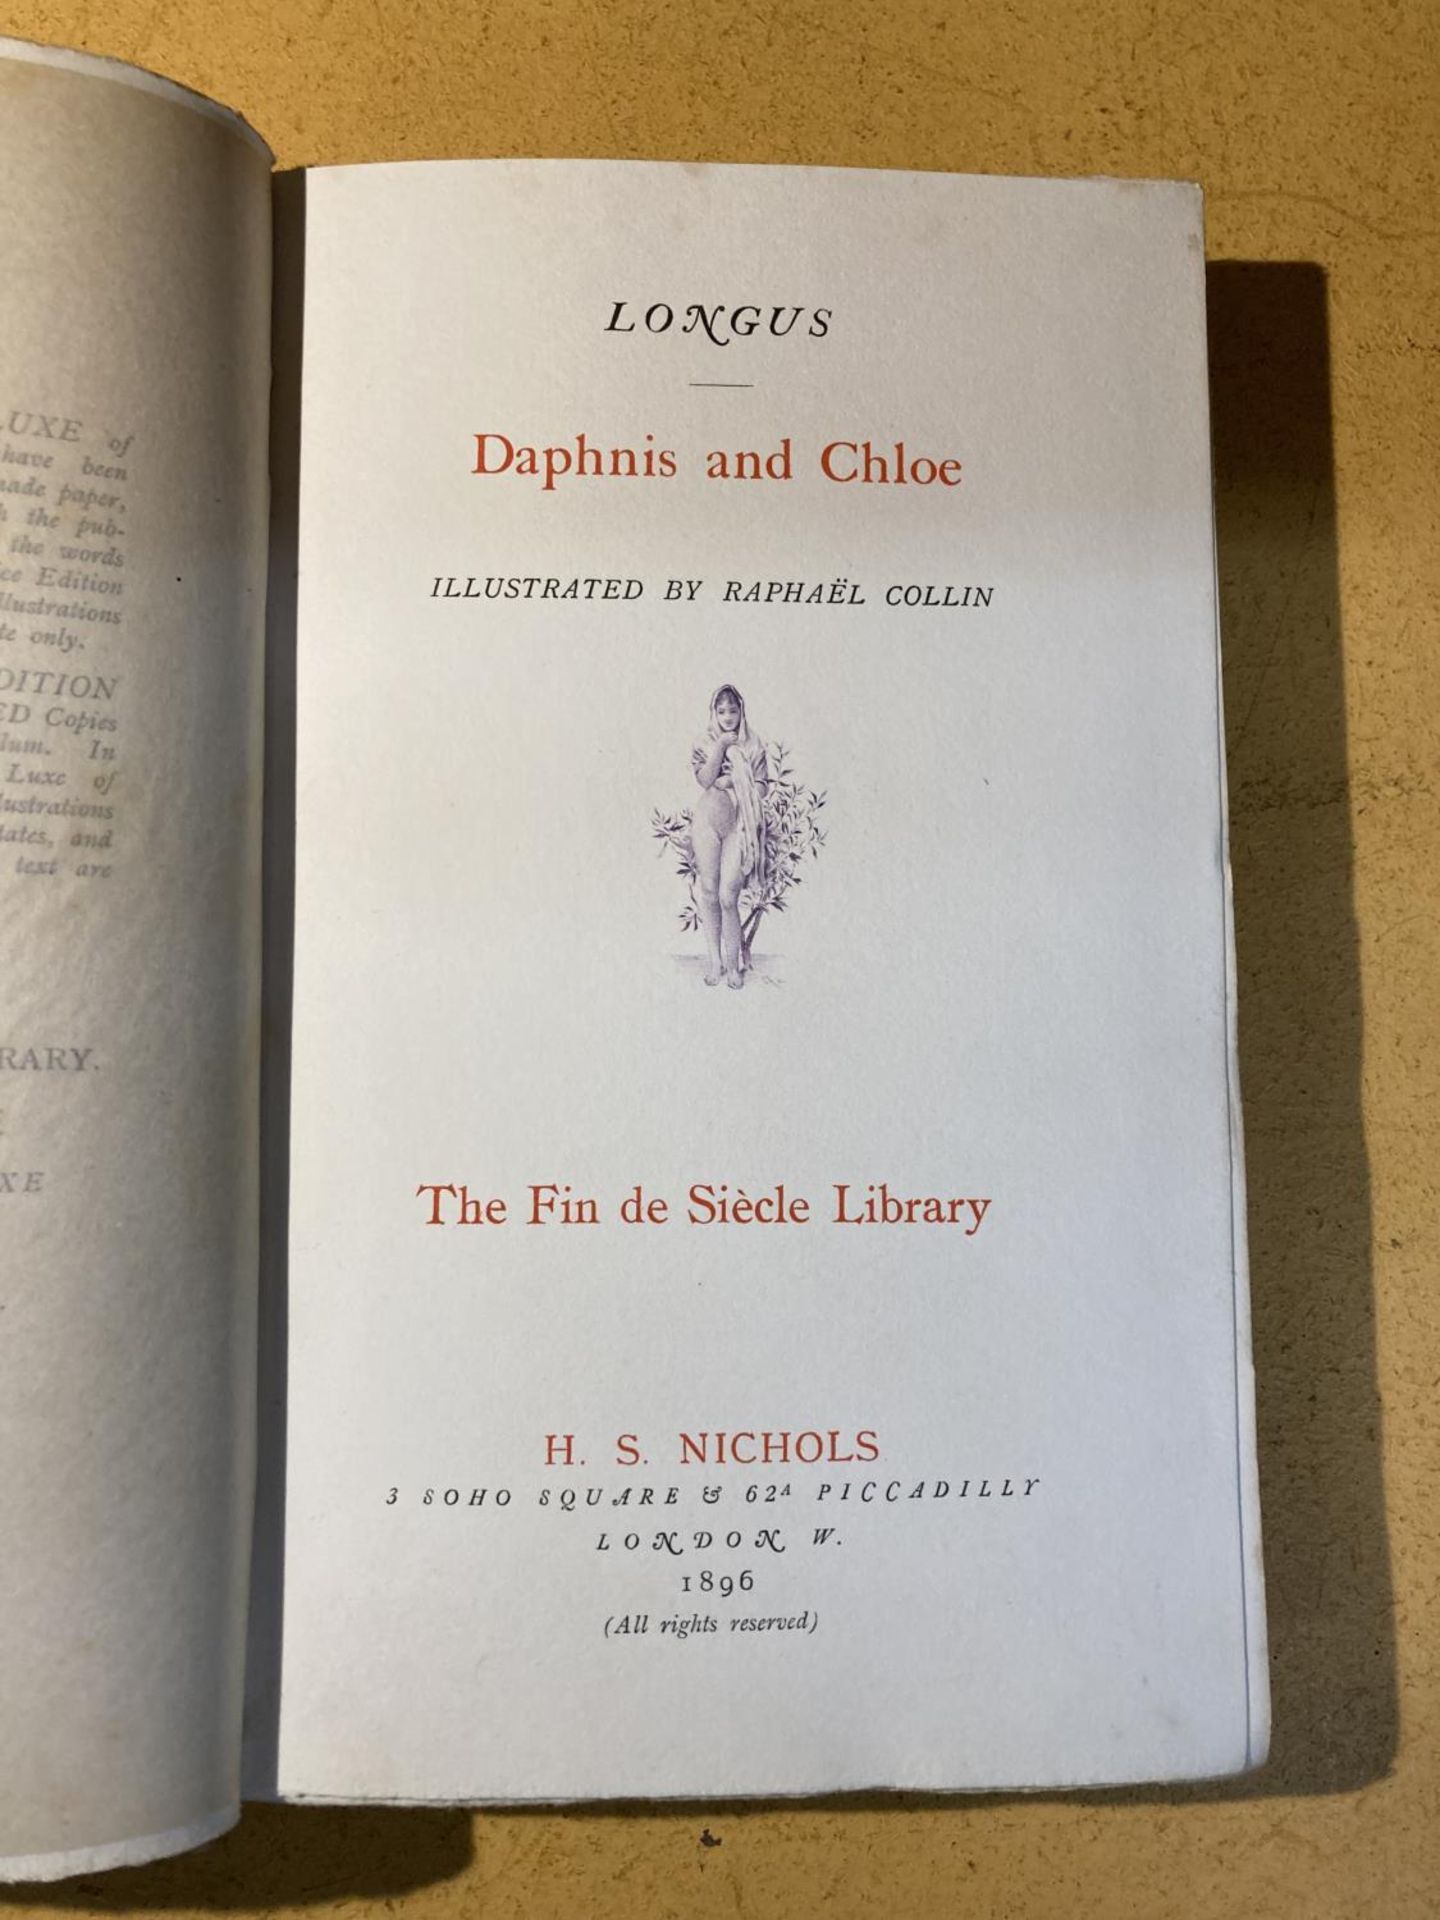 A LIMITED EDITION 52 OF 100 DAPHNIS AND CHLOE - LONGUS - 1896, INCLUDES A SLIPCASE ILLUSTRATED BY - Image 6 of 7